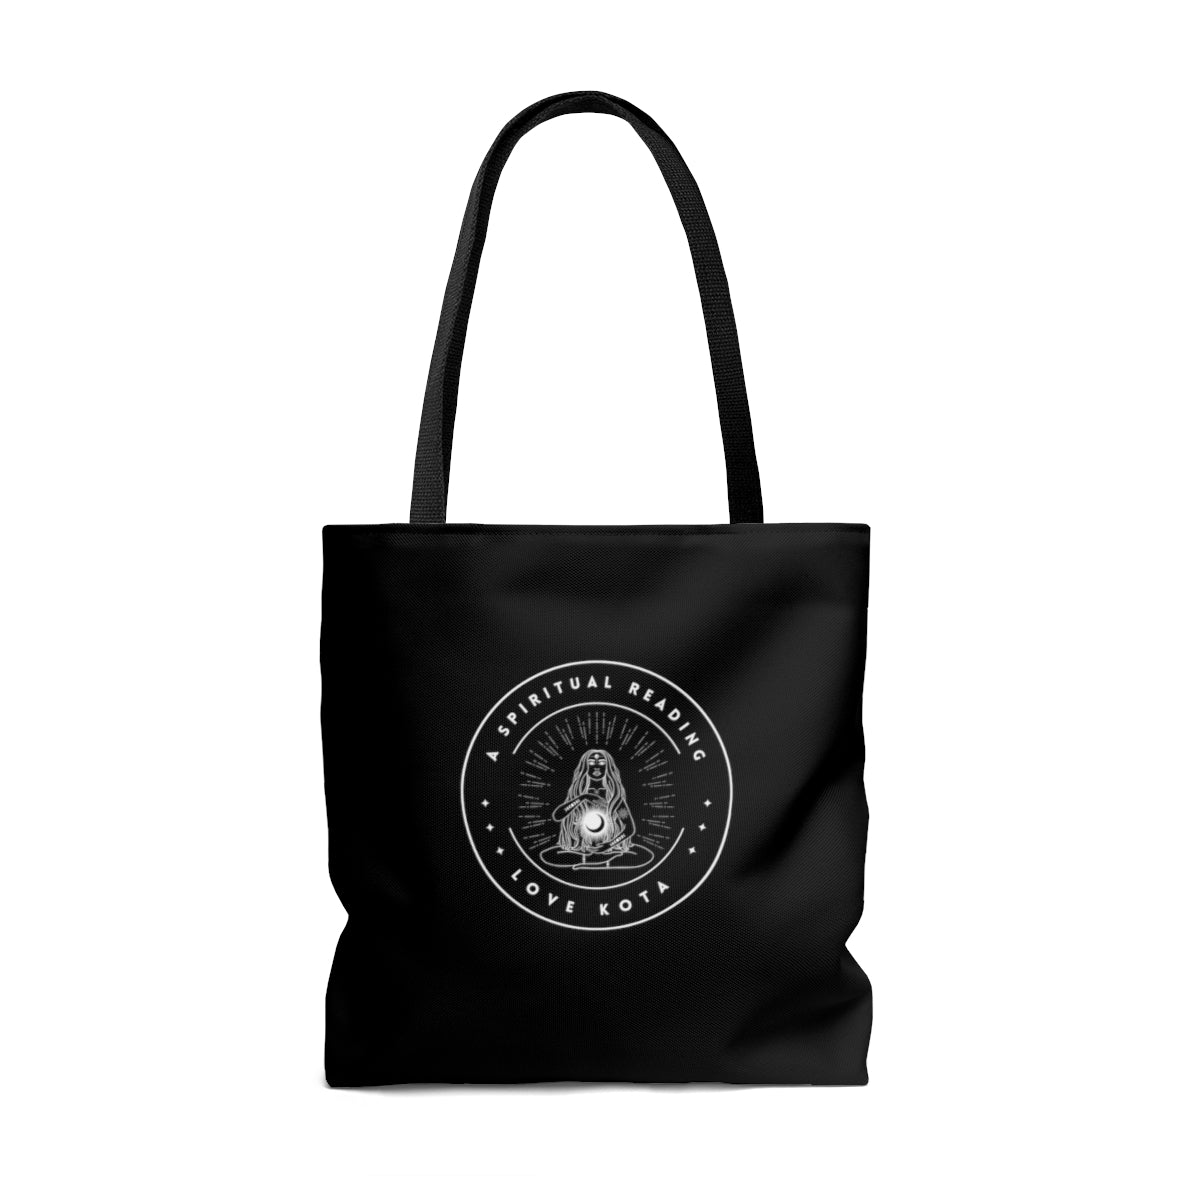 ALL I NEED IS A FULL MOON TOTE